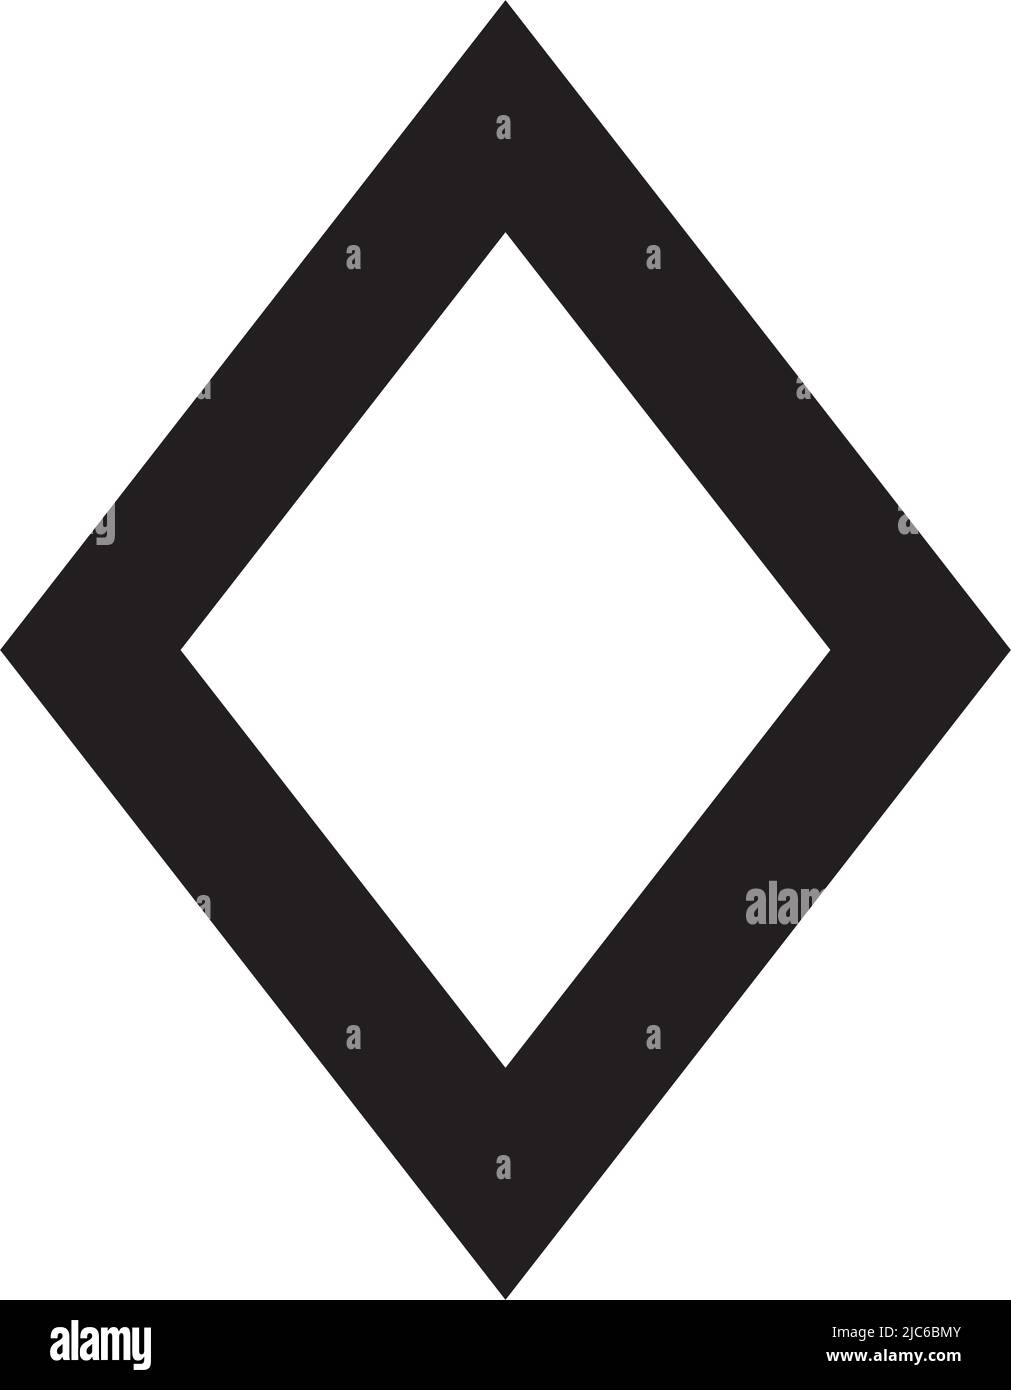 Rhombus symbol shape vector icon outline stroke for creative graphic design ui element in a pictogram illustration Stock Vector